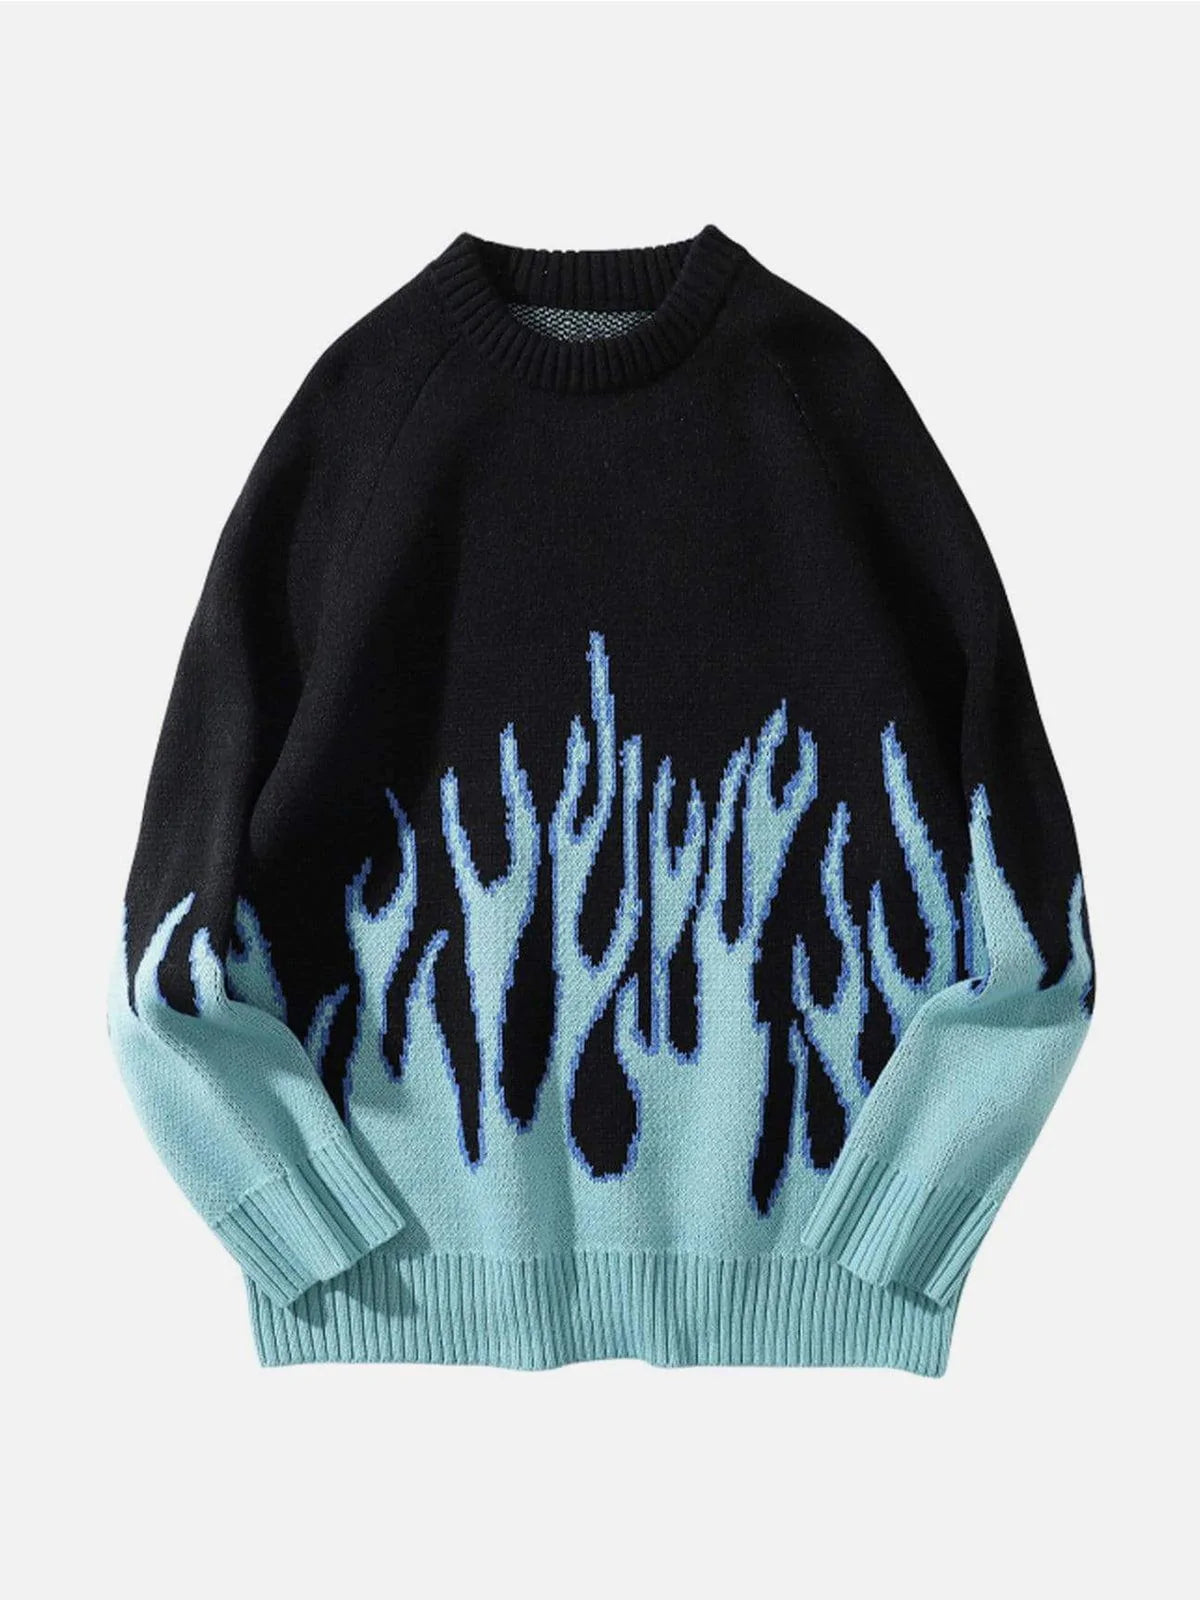 Faire Echo "Cyan Flame/Pink Flame" Knitted Sweater